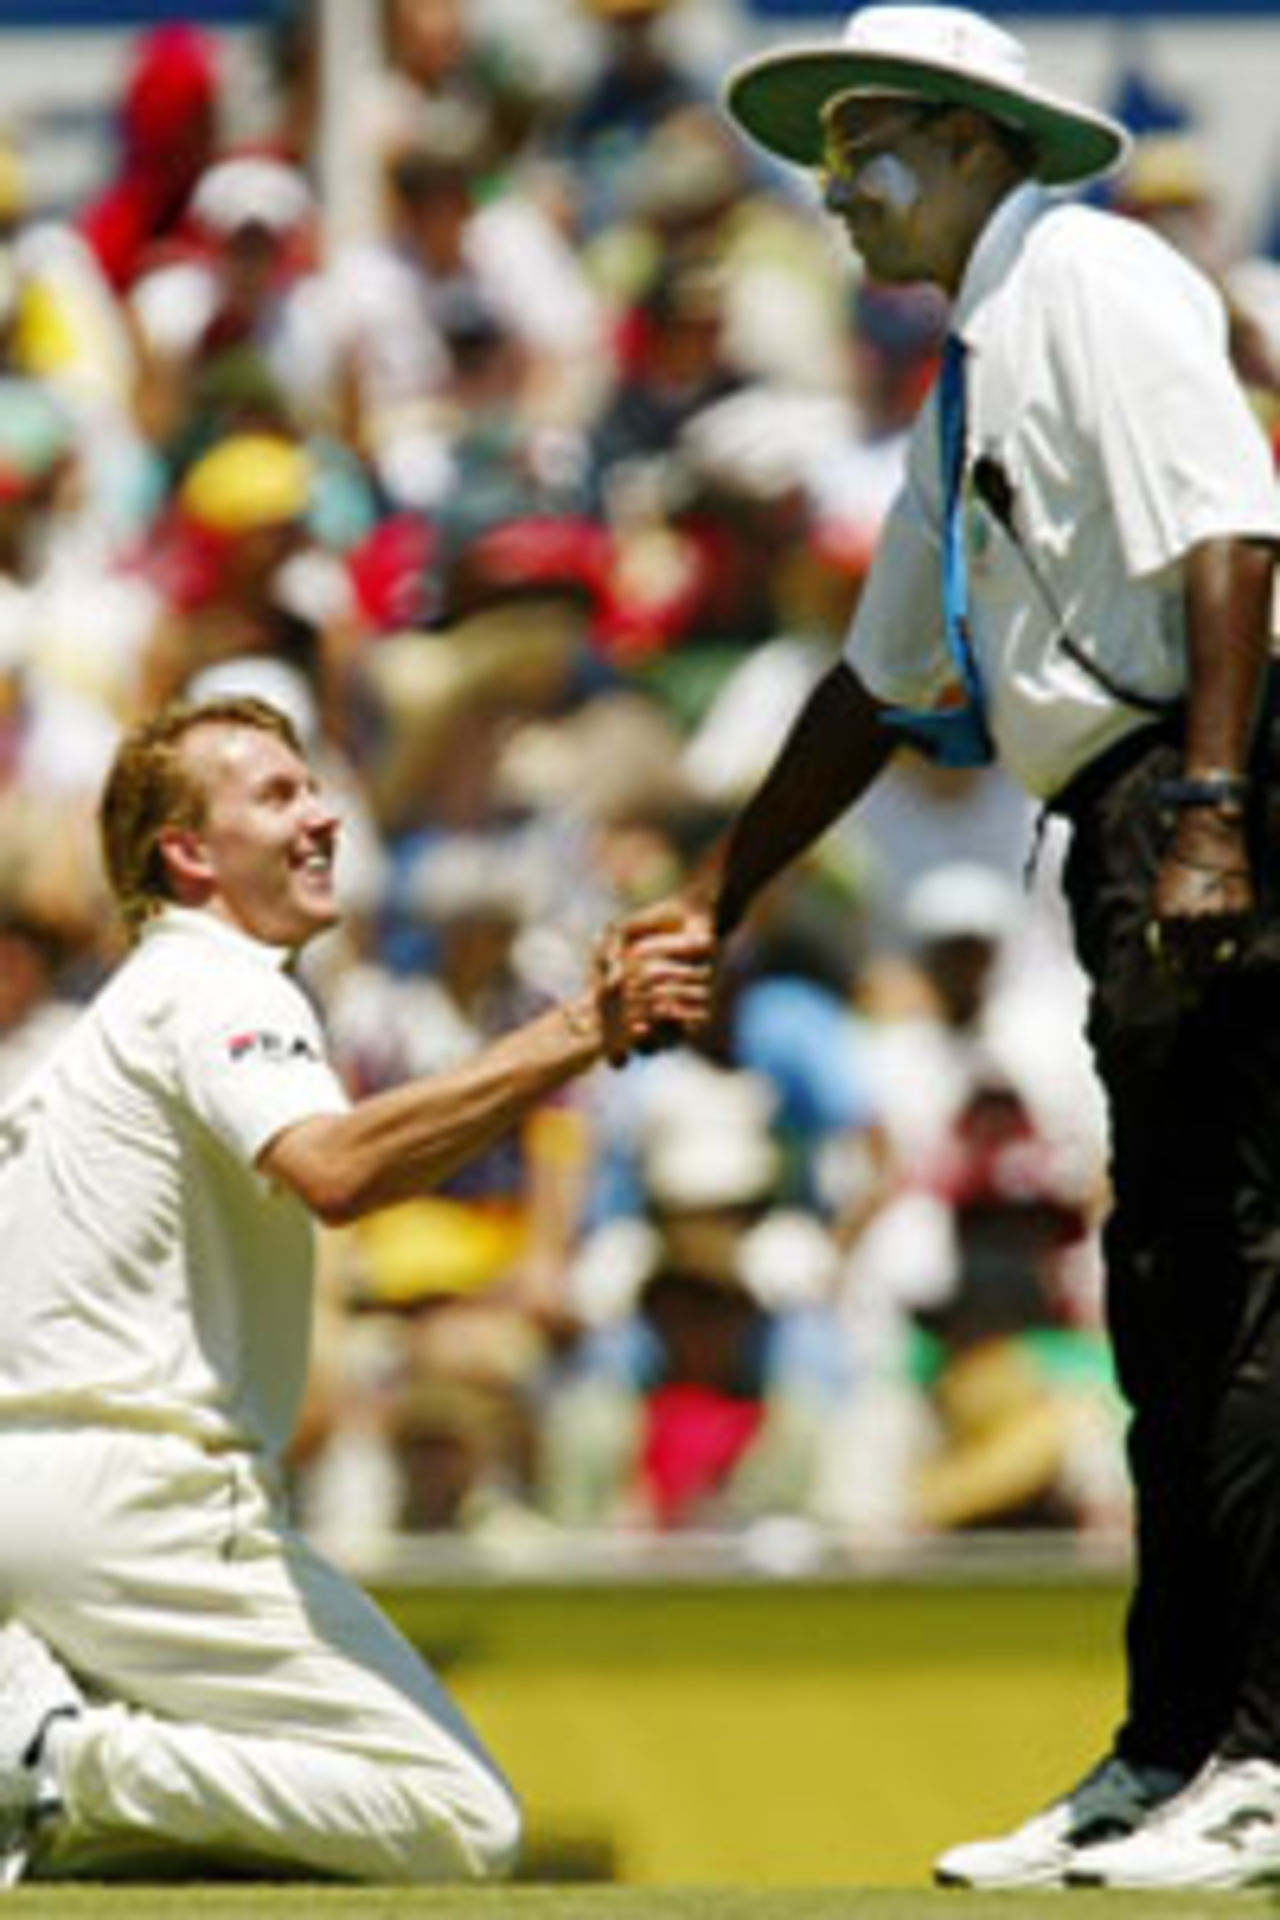 Australian paceman Brett Lee (L) is helped to his feet by umpire Steve Bucknor after being felled by a wayward throw on the second day of the fourth Test Match against India in Sydney, 03 January 2004. At tea, India was 495-3.